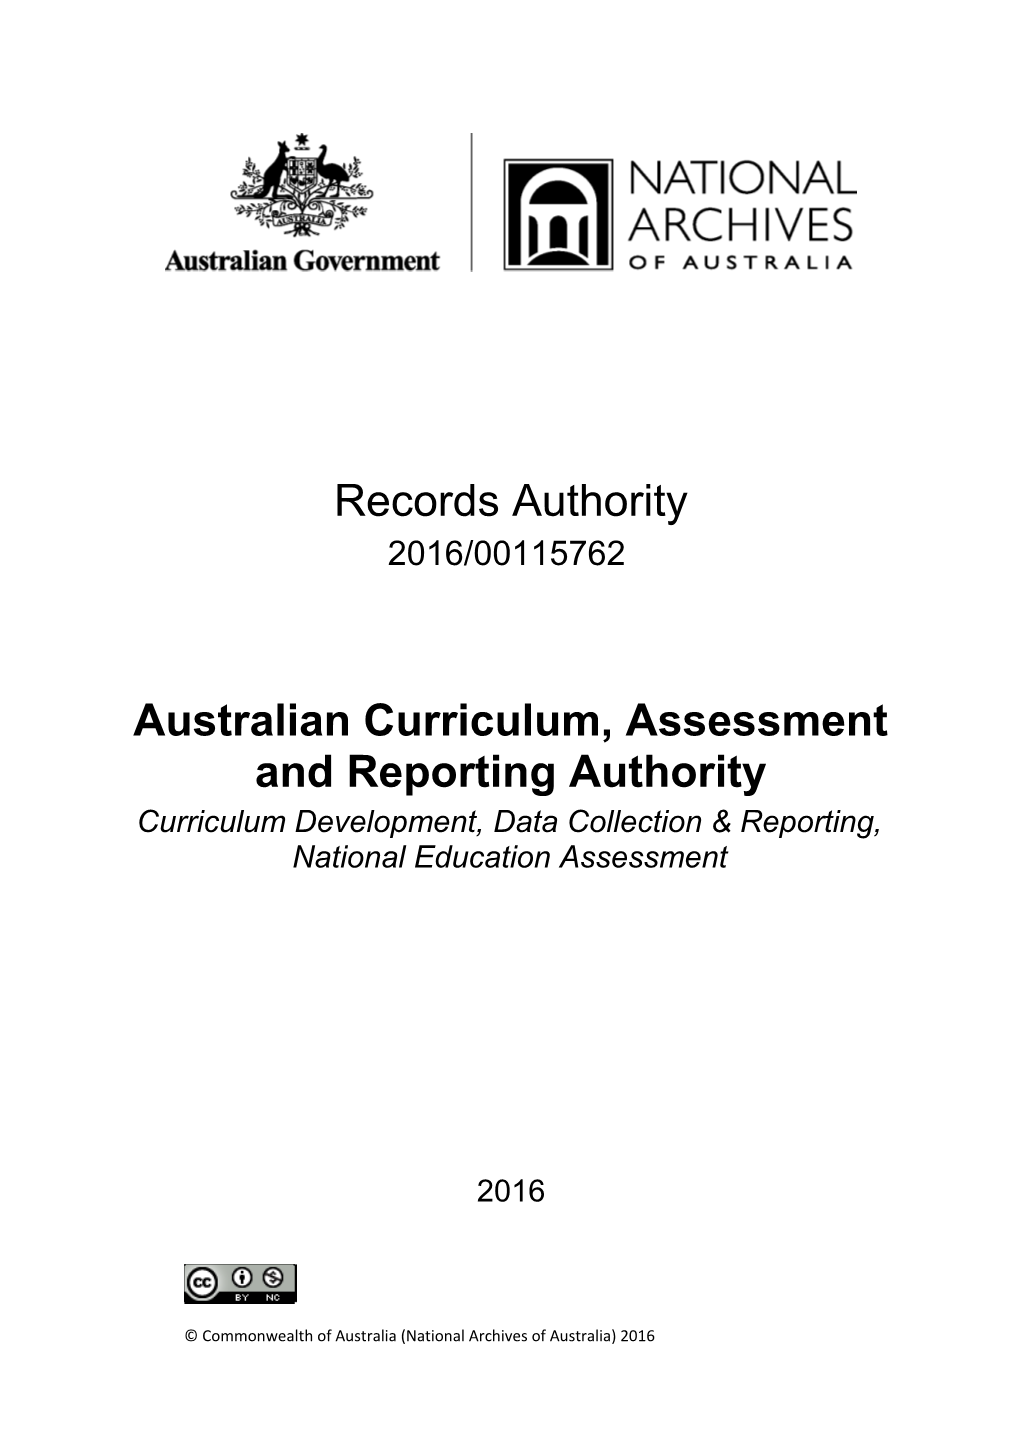 Australian Curriculum Assessment and Reporting Authority ACARA - Records Authority